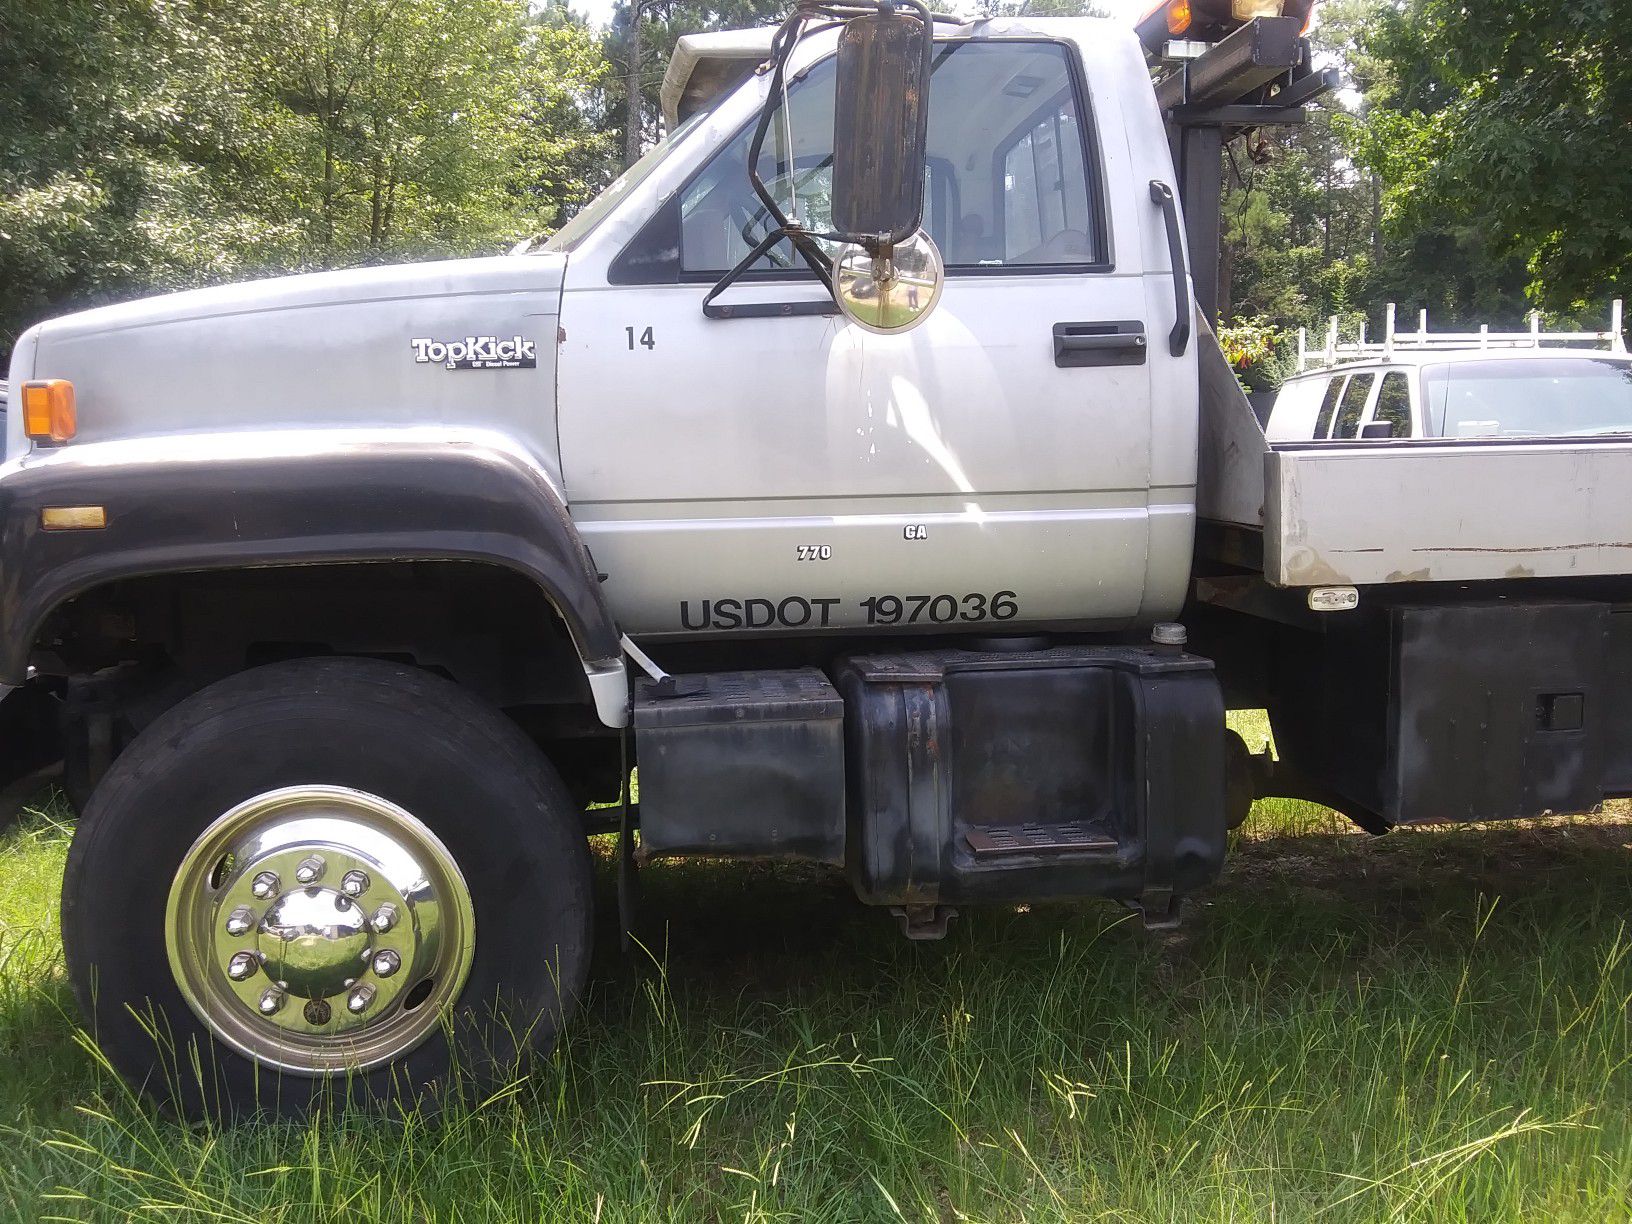 Tow truck diesel Topkick 1990 with less then 100k miles. Come see & get a deal